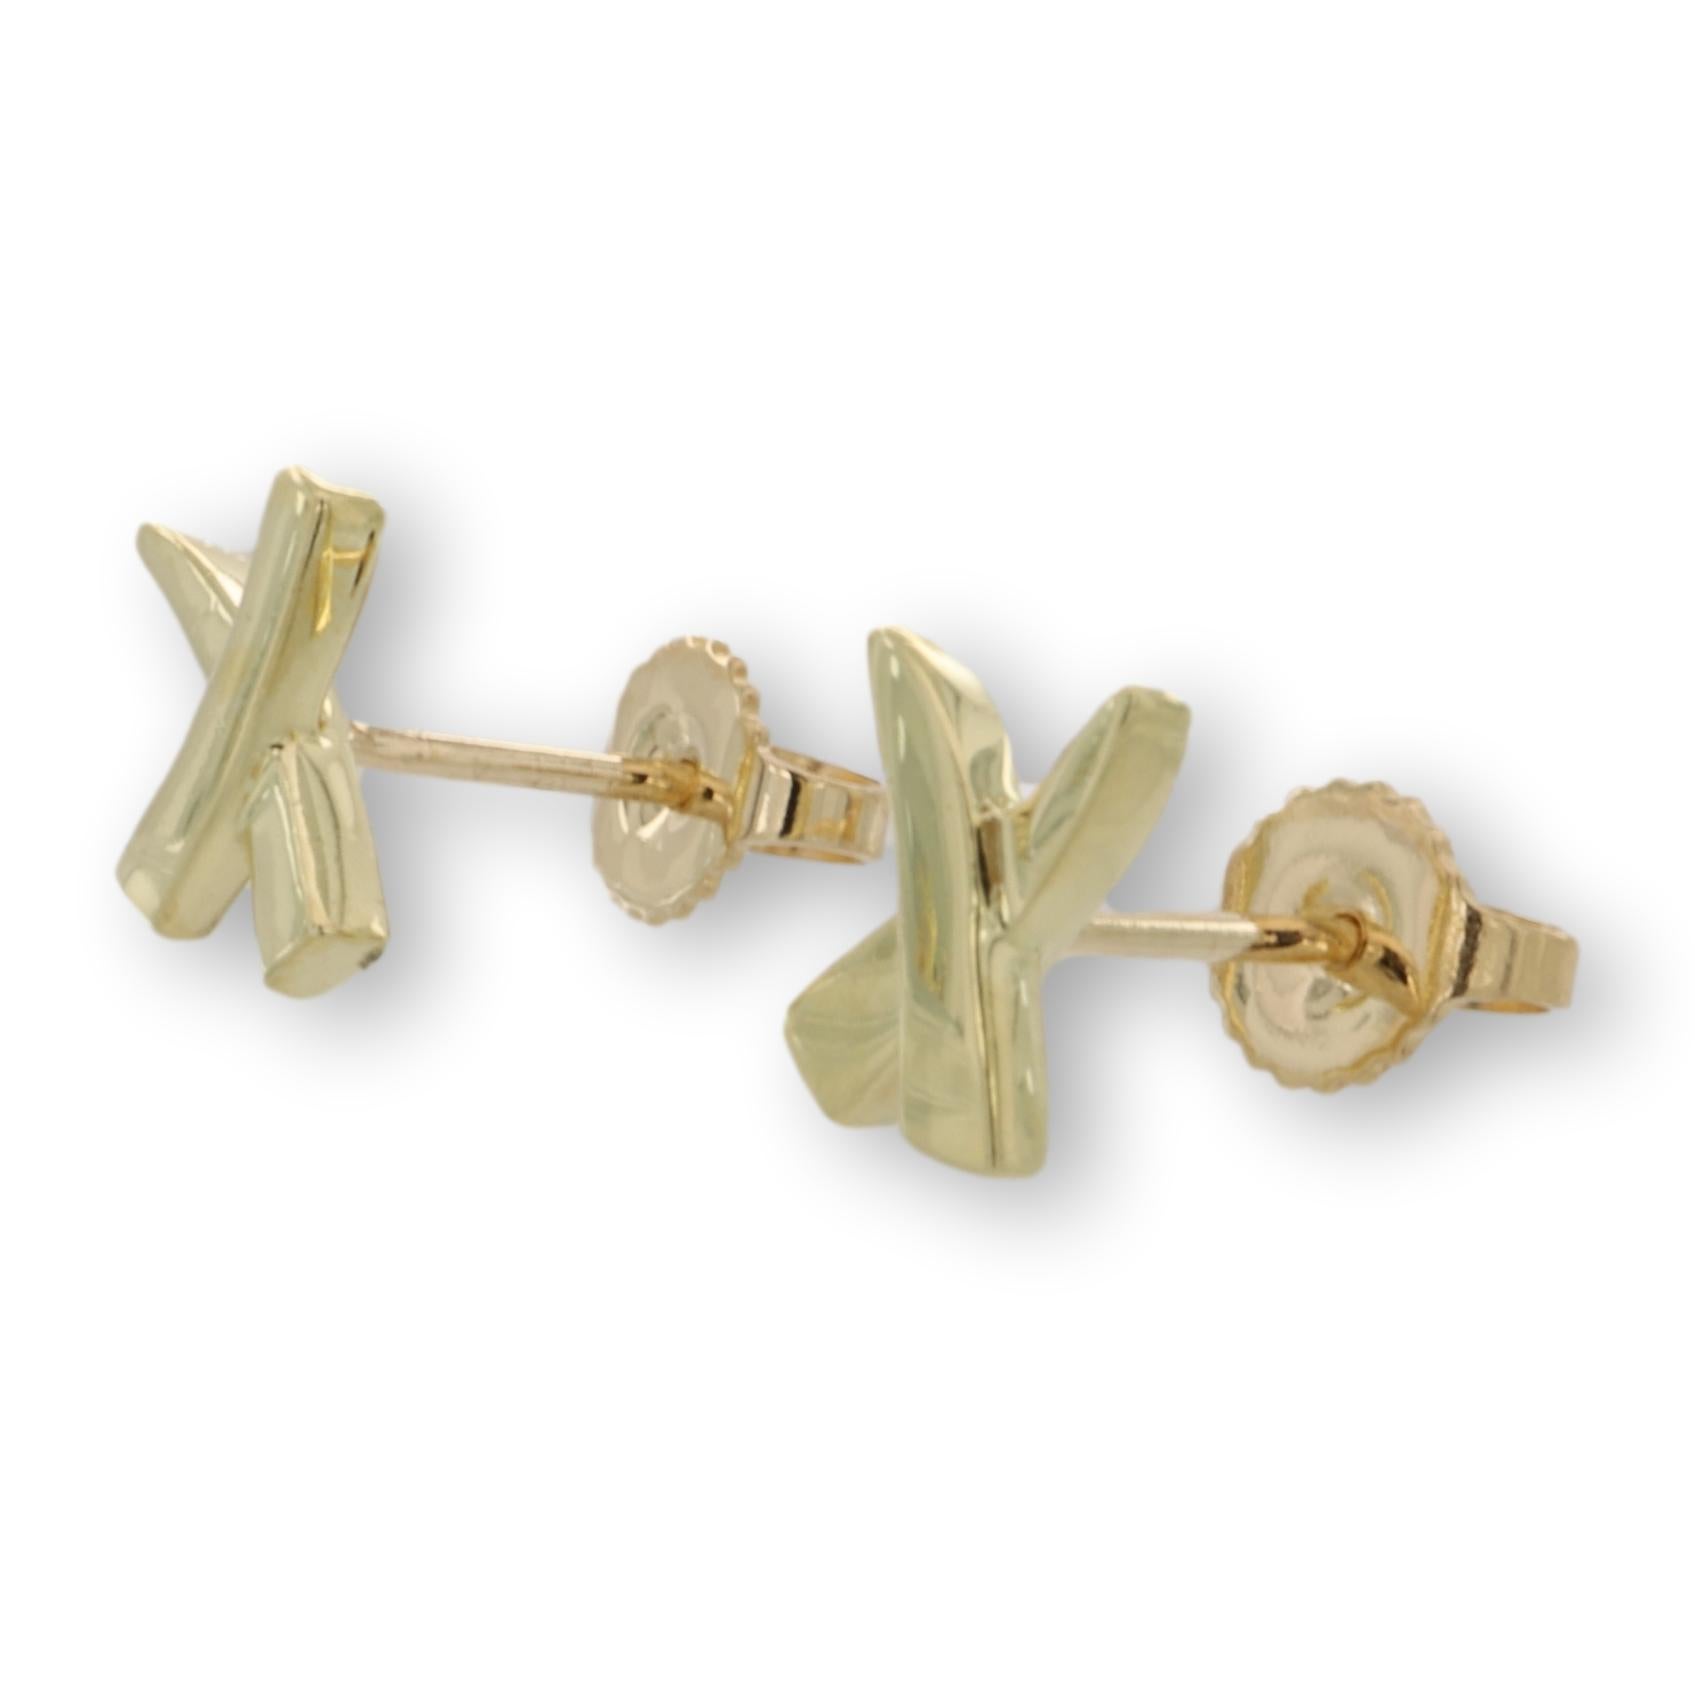 Tiffany & Co. pair of earrings designed by Paloma Picasso from the Graffiti collection finely crafted in 18 karat yellow gold with an X design with posts and backs. Fully hallmarked with designer signature, logo and metal content.

Earrings